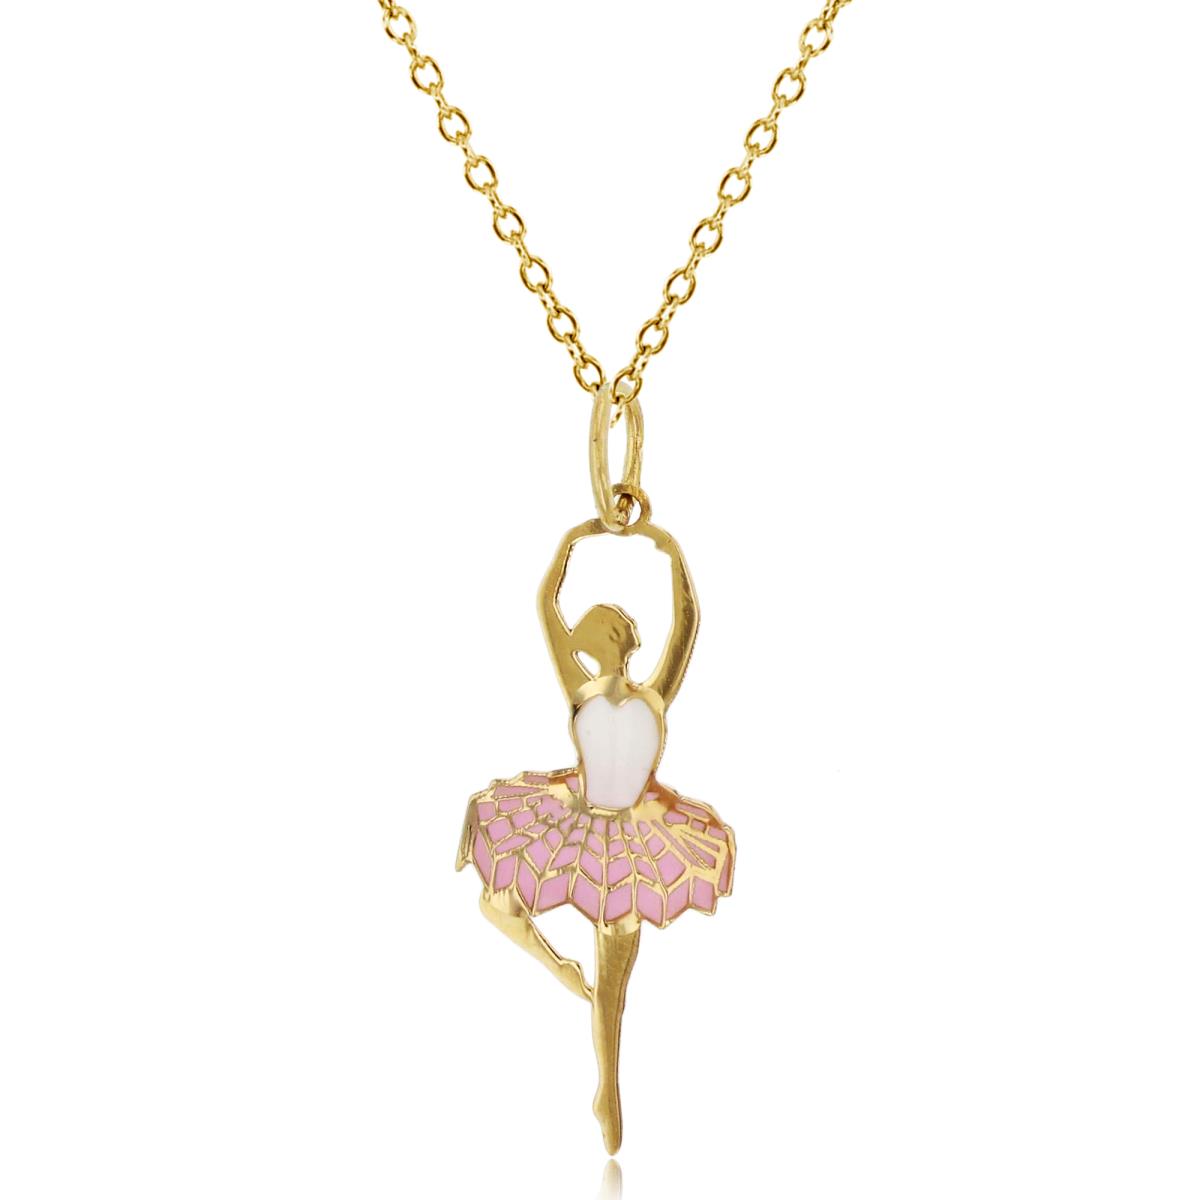 14K Yellow Gold Pirouette Ballerina 18" 020 Rolo Necklace